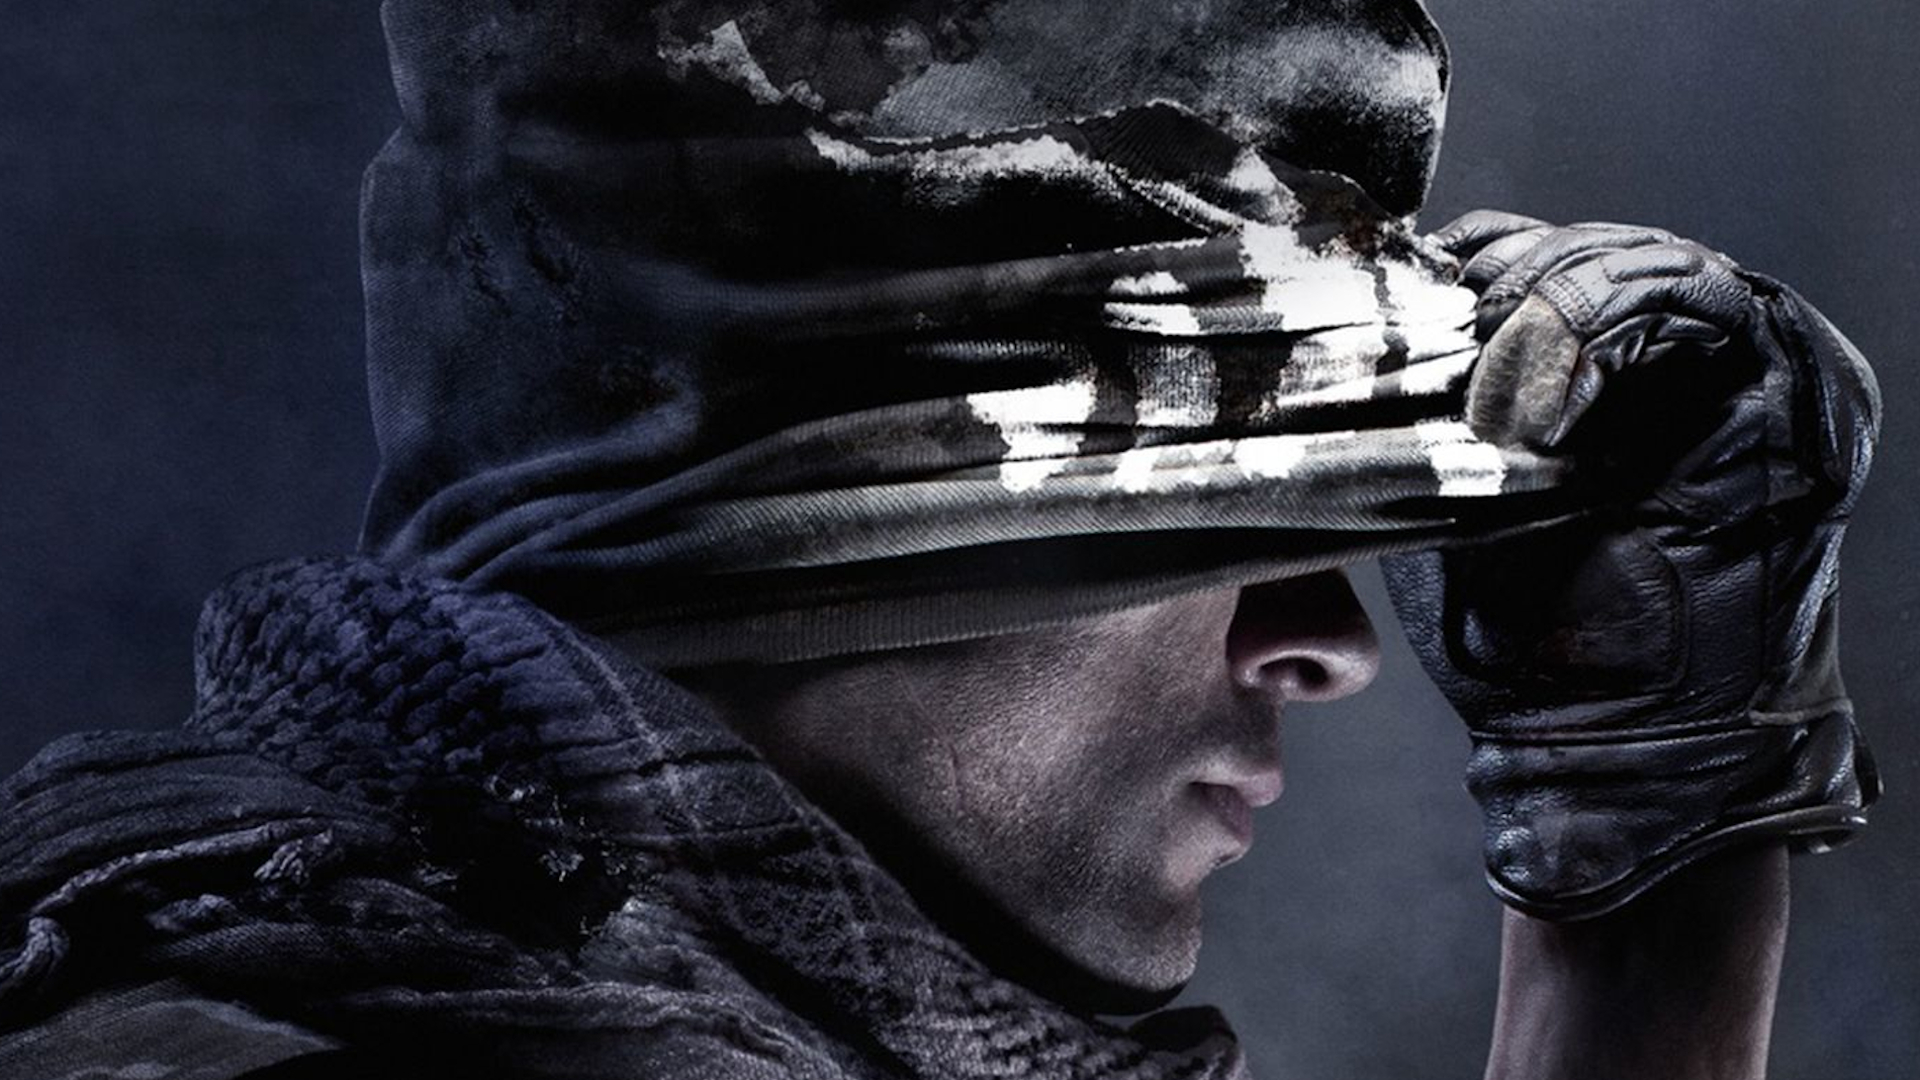 I played the worst Call of Duty in 2021 and deserved what I got